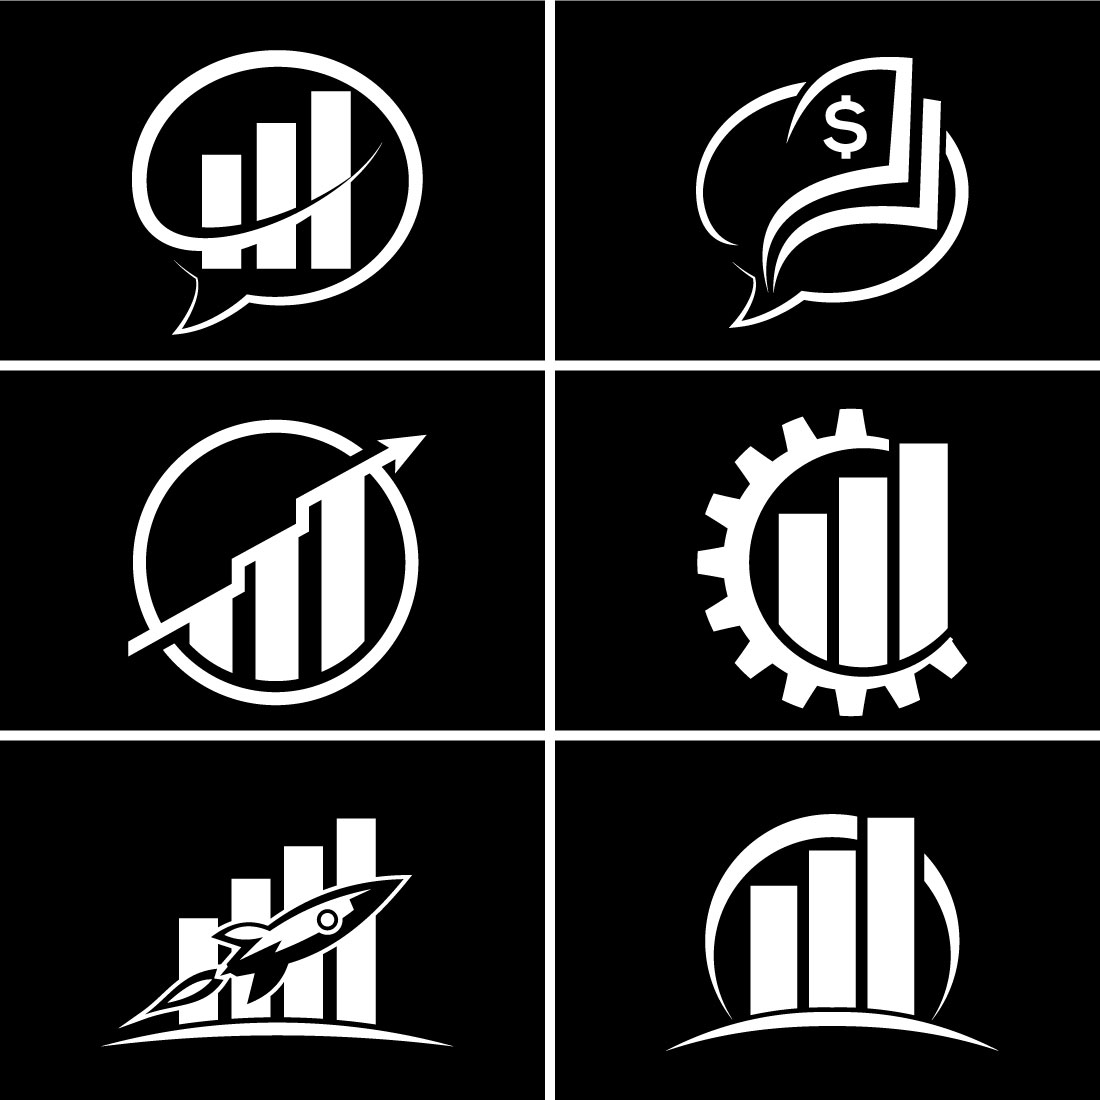 White Finance and Accounting Logo Set with black background.